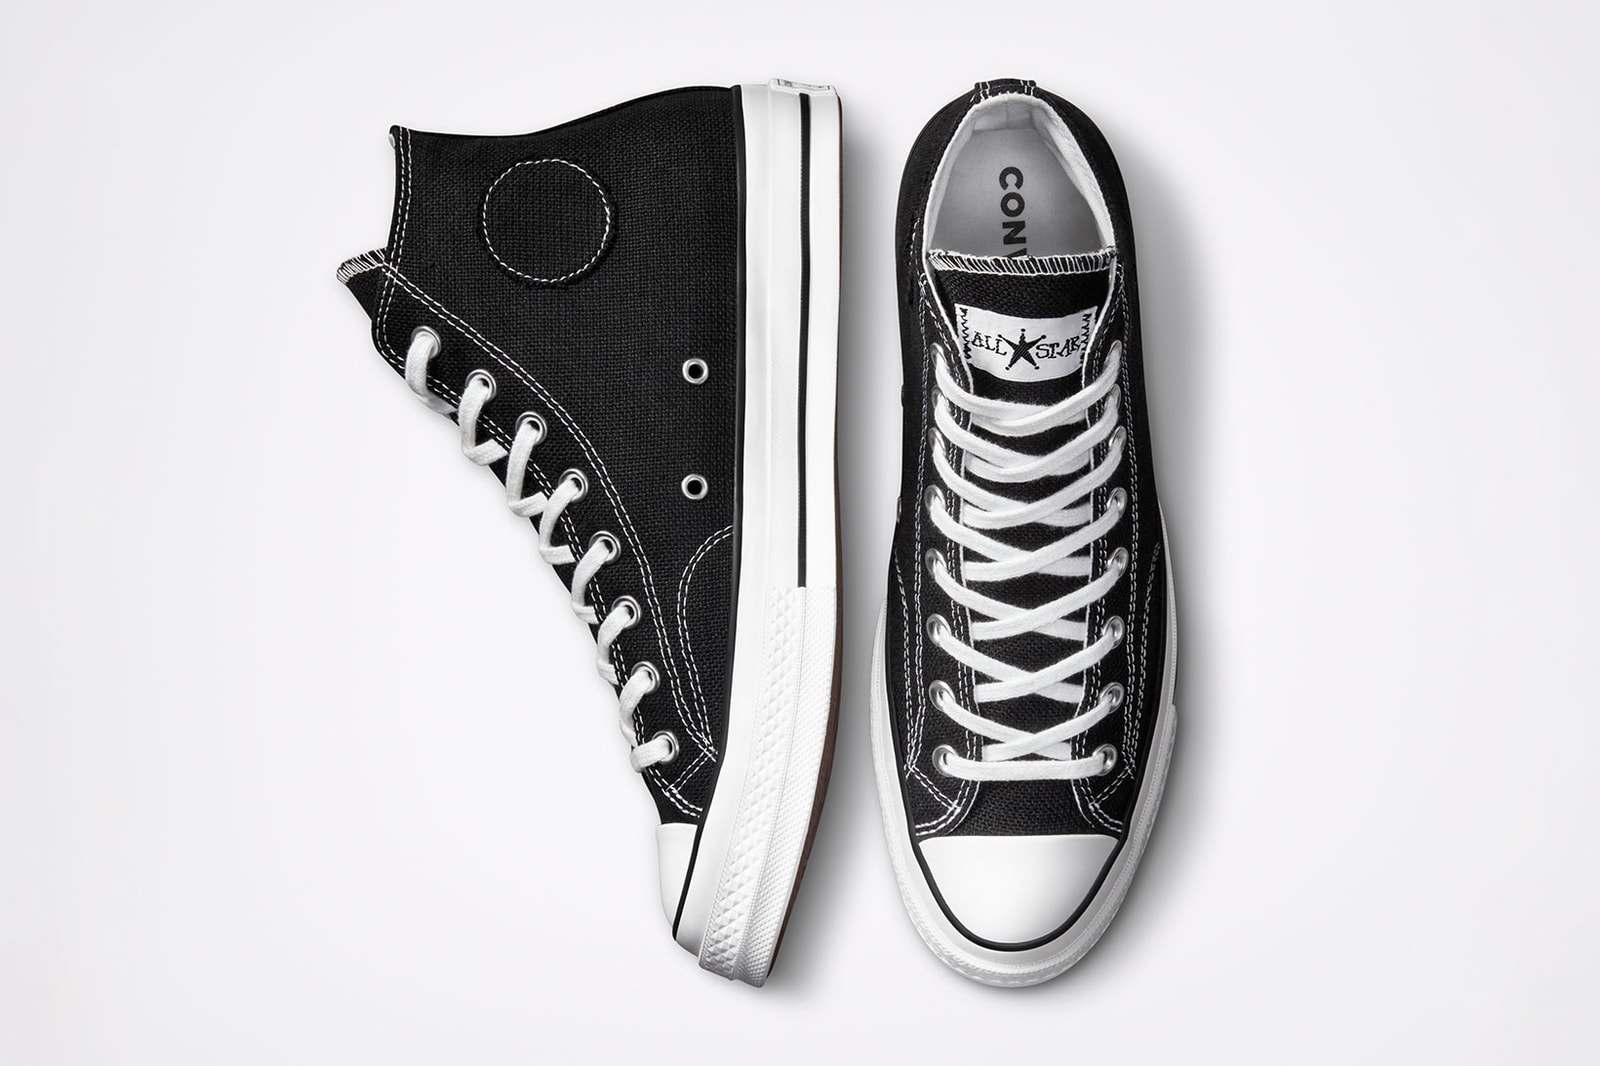 Stussy x Converse Collaboration Official Images | HYPEBAE